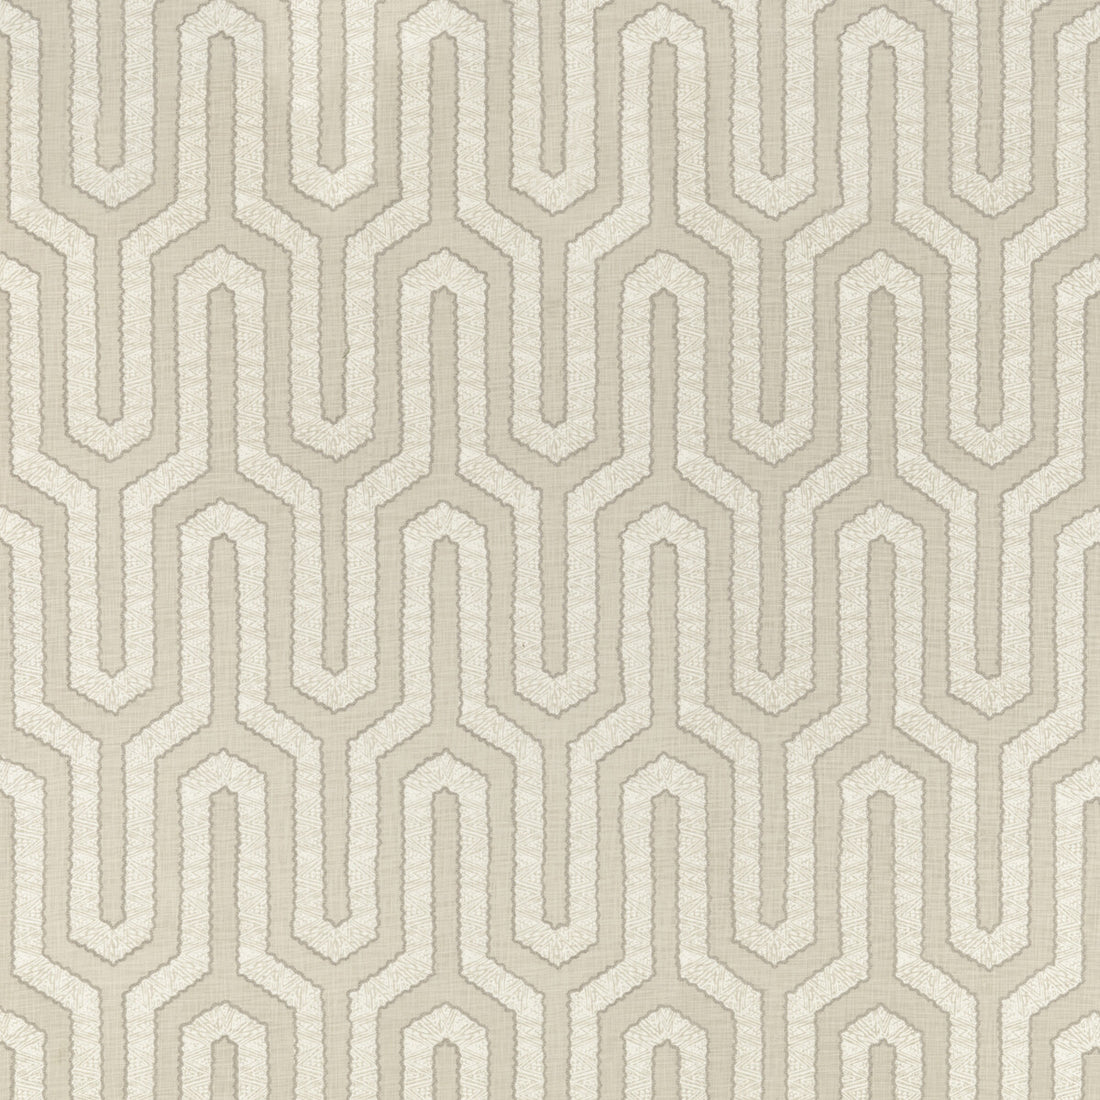 Santiago fabric in stone color - pattern PP50442.2.0 - by Baker Lifestyle in the Homes &amp; Gardens III collection